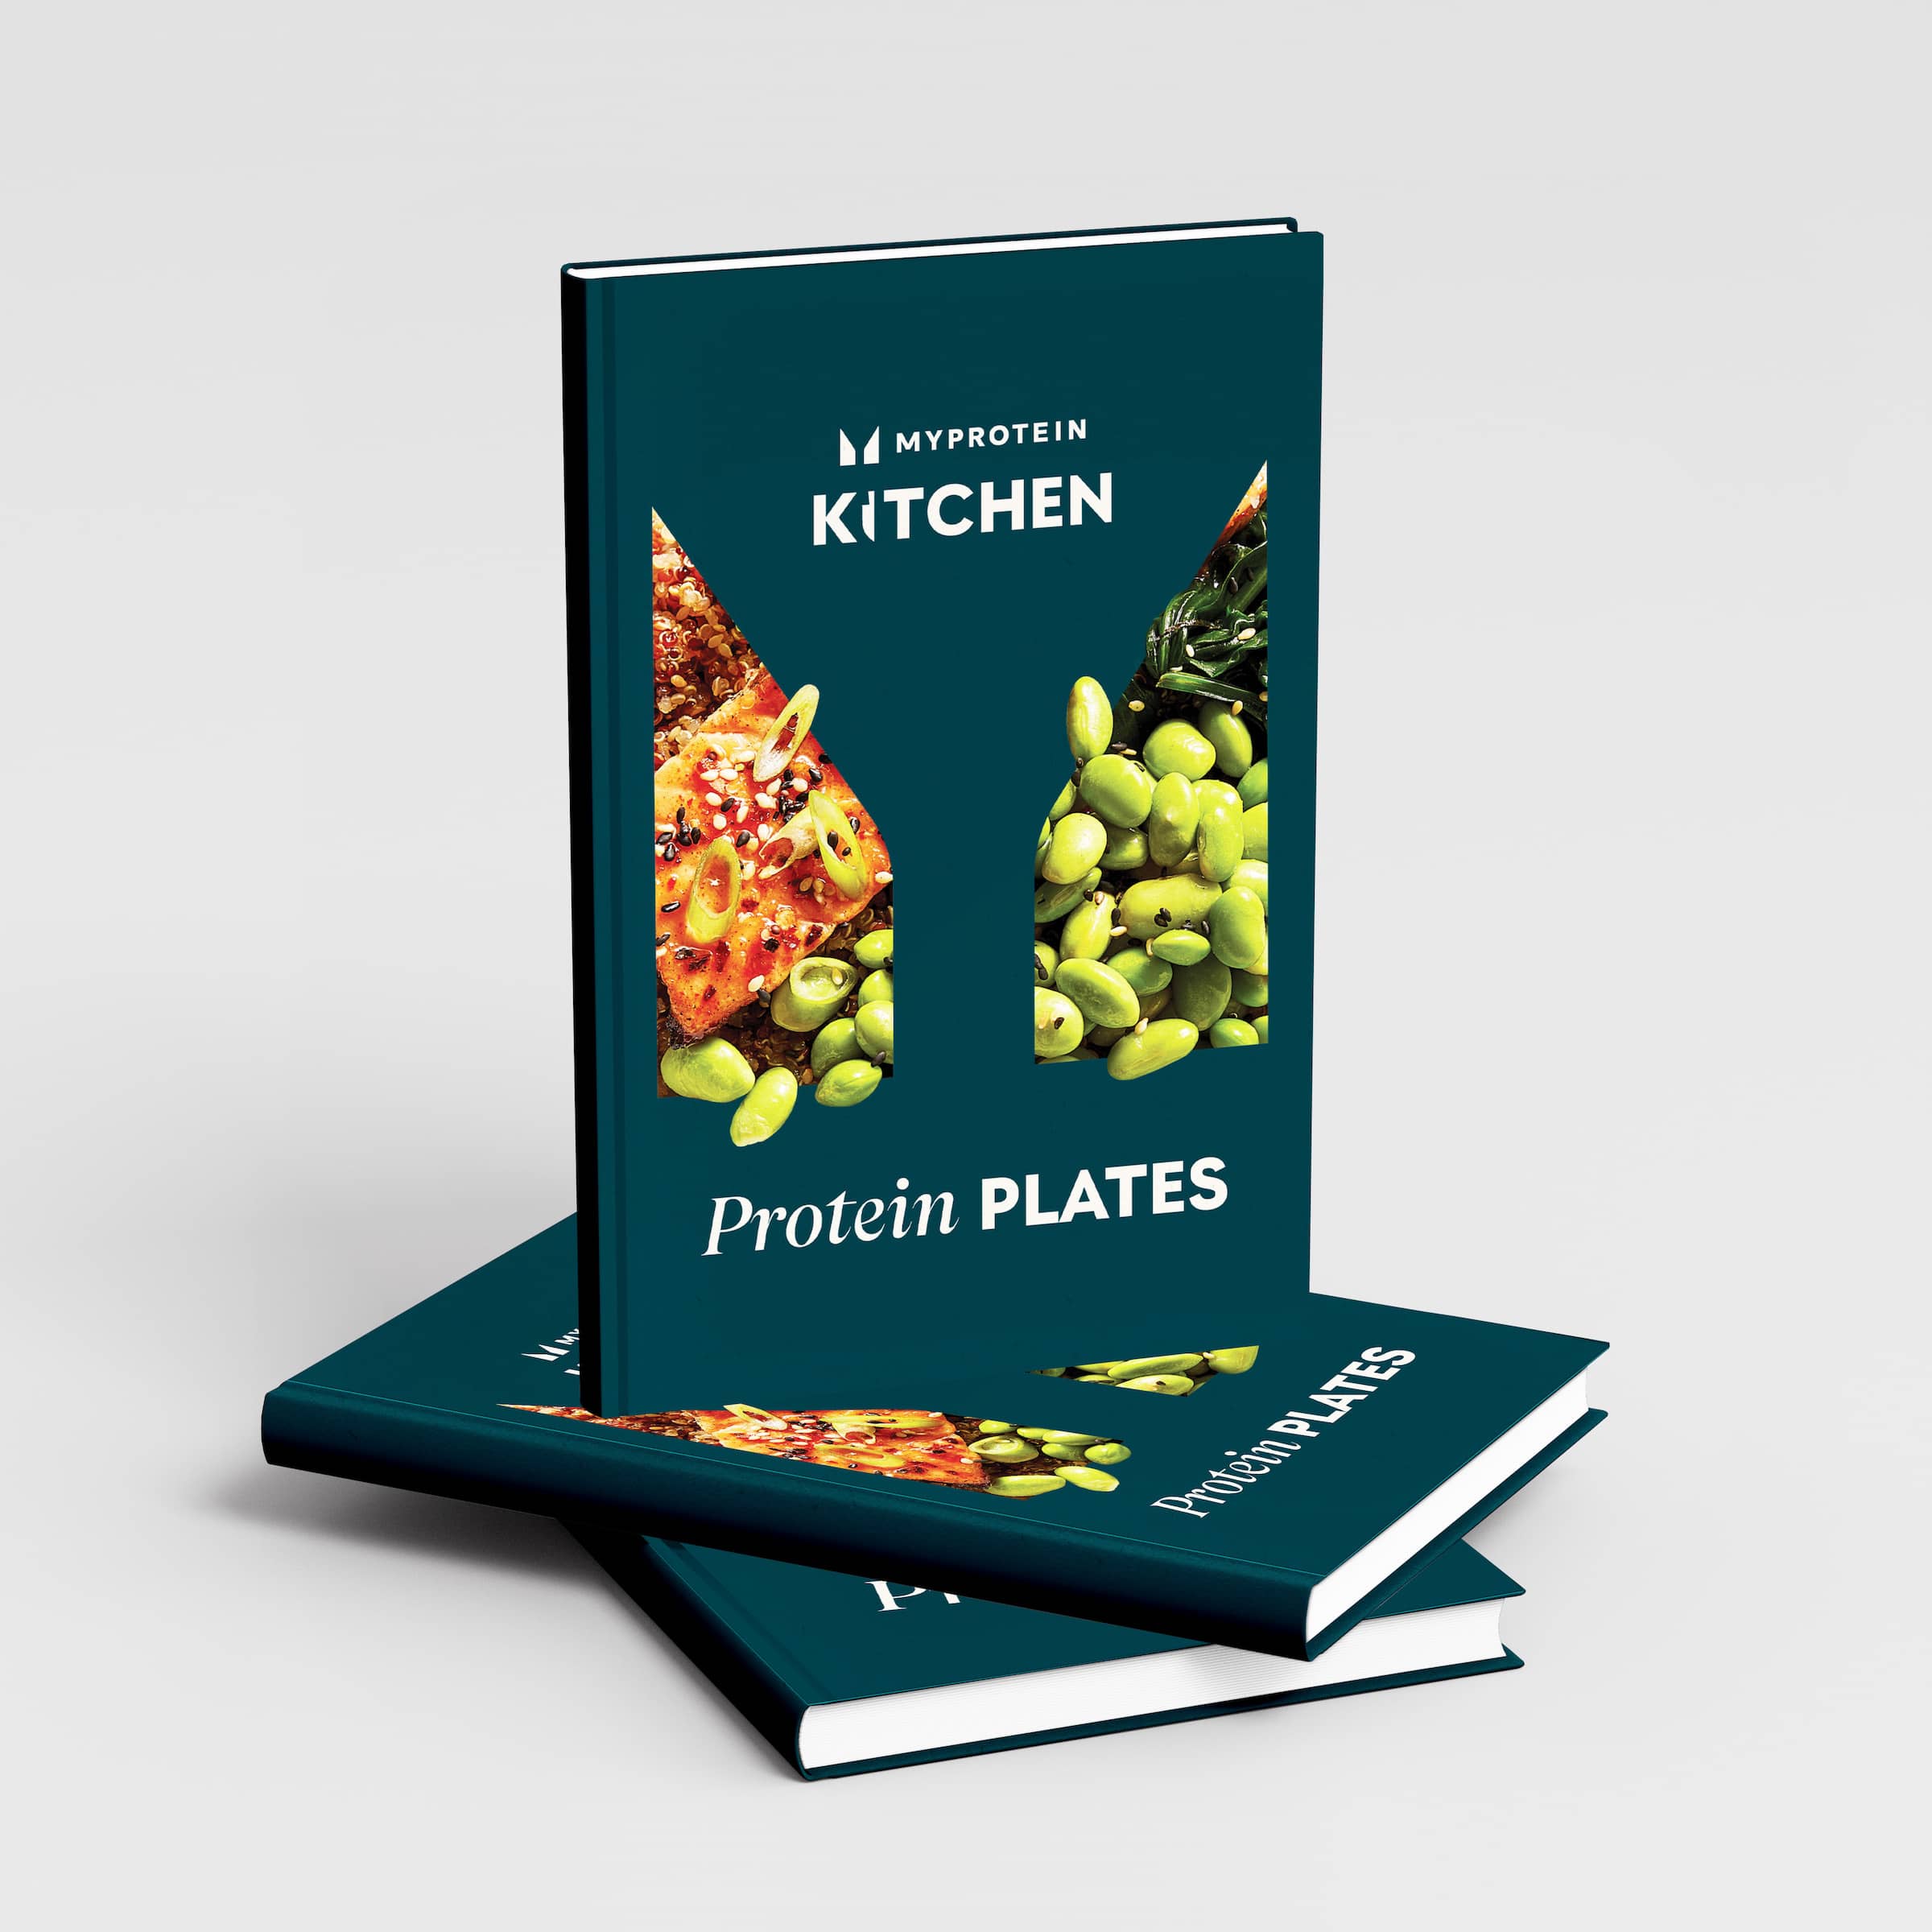 Myprotein: Unleash The Power of ‘Protein Plates’ Recipe Book!